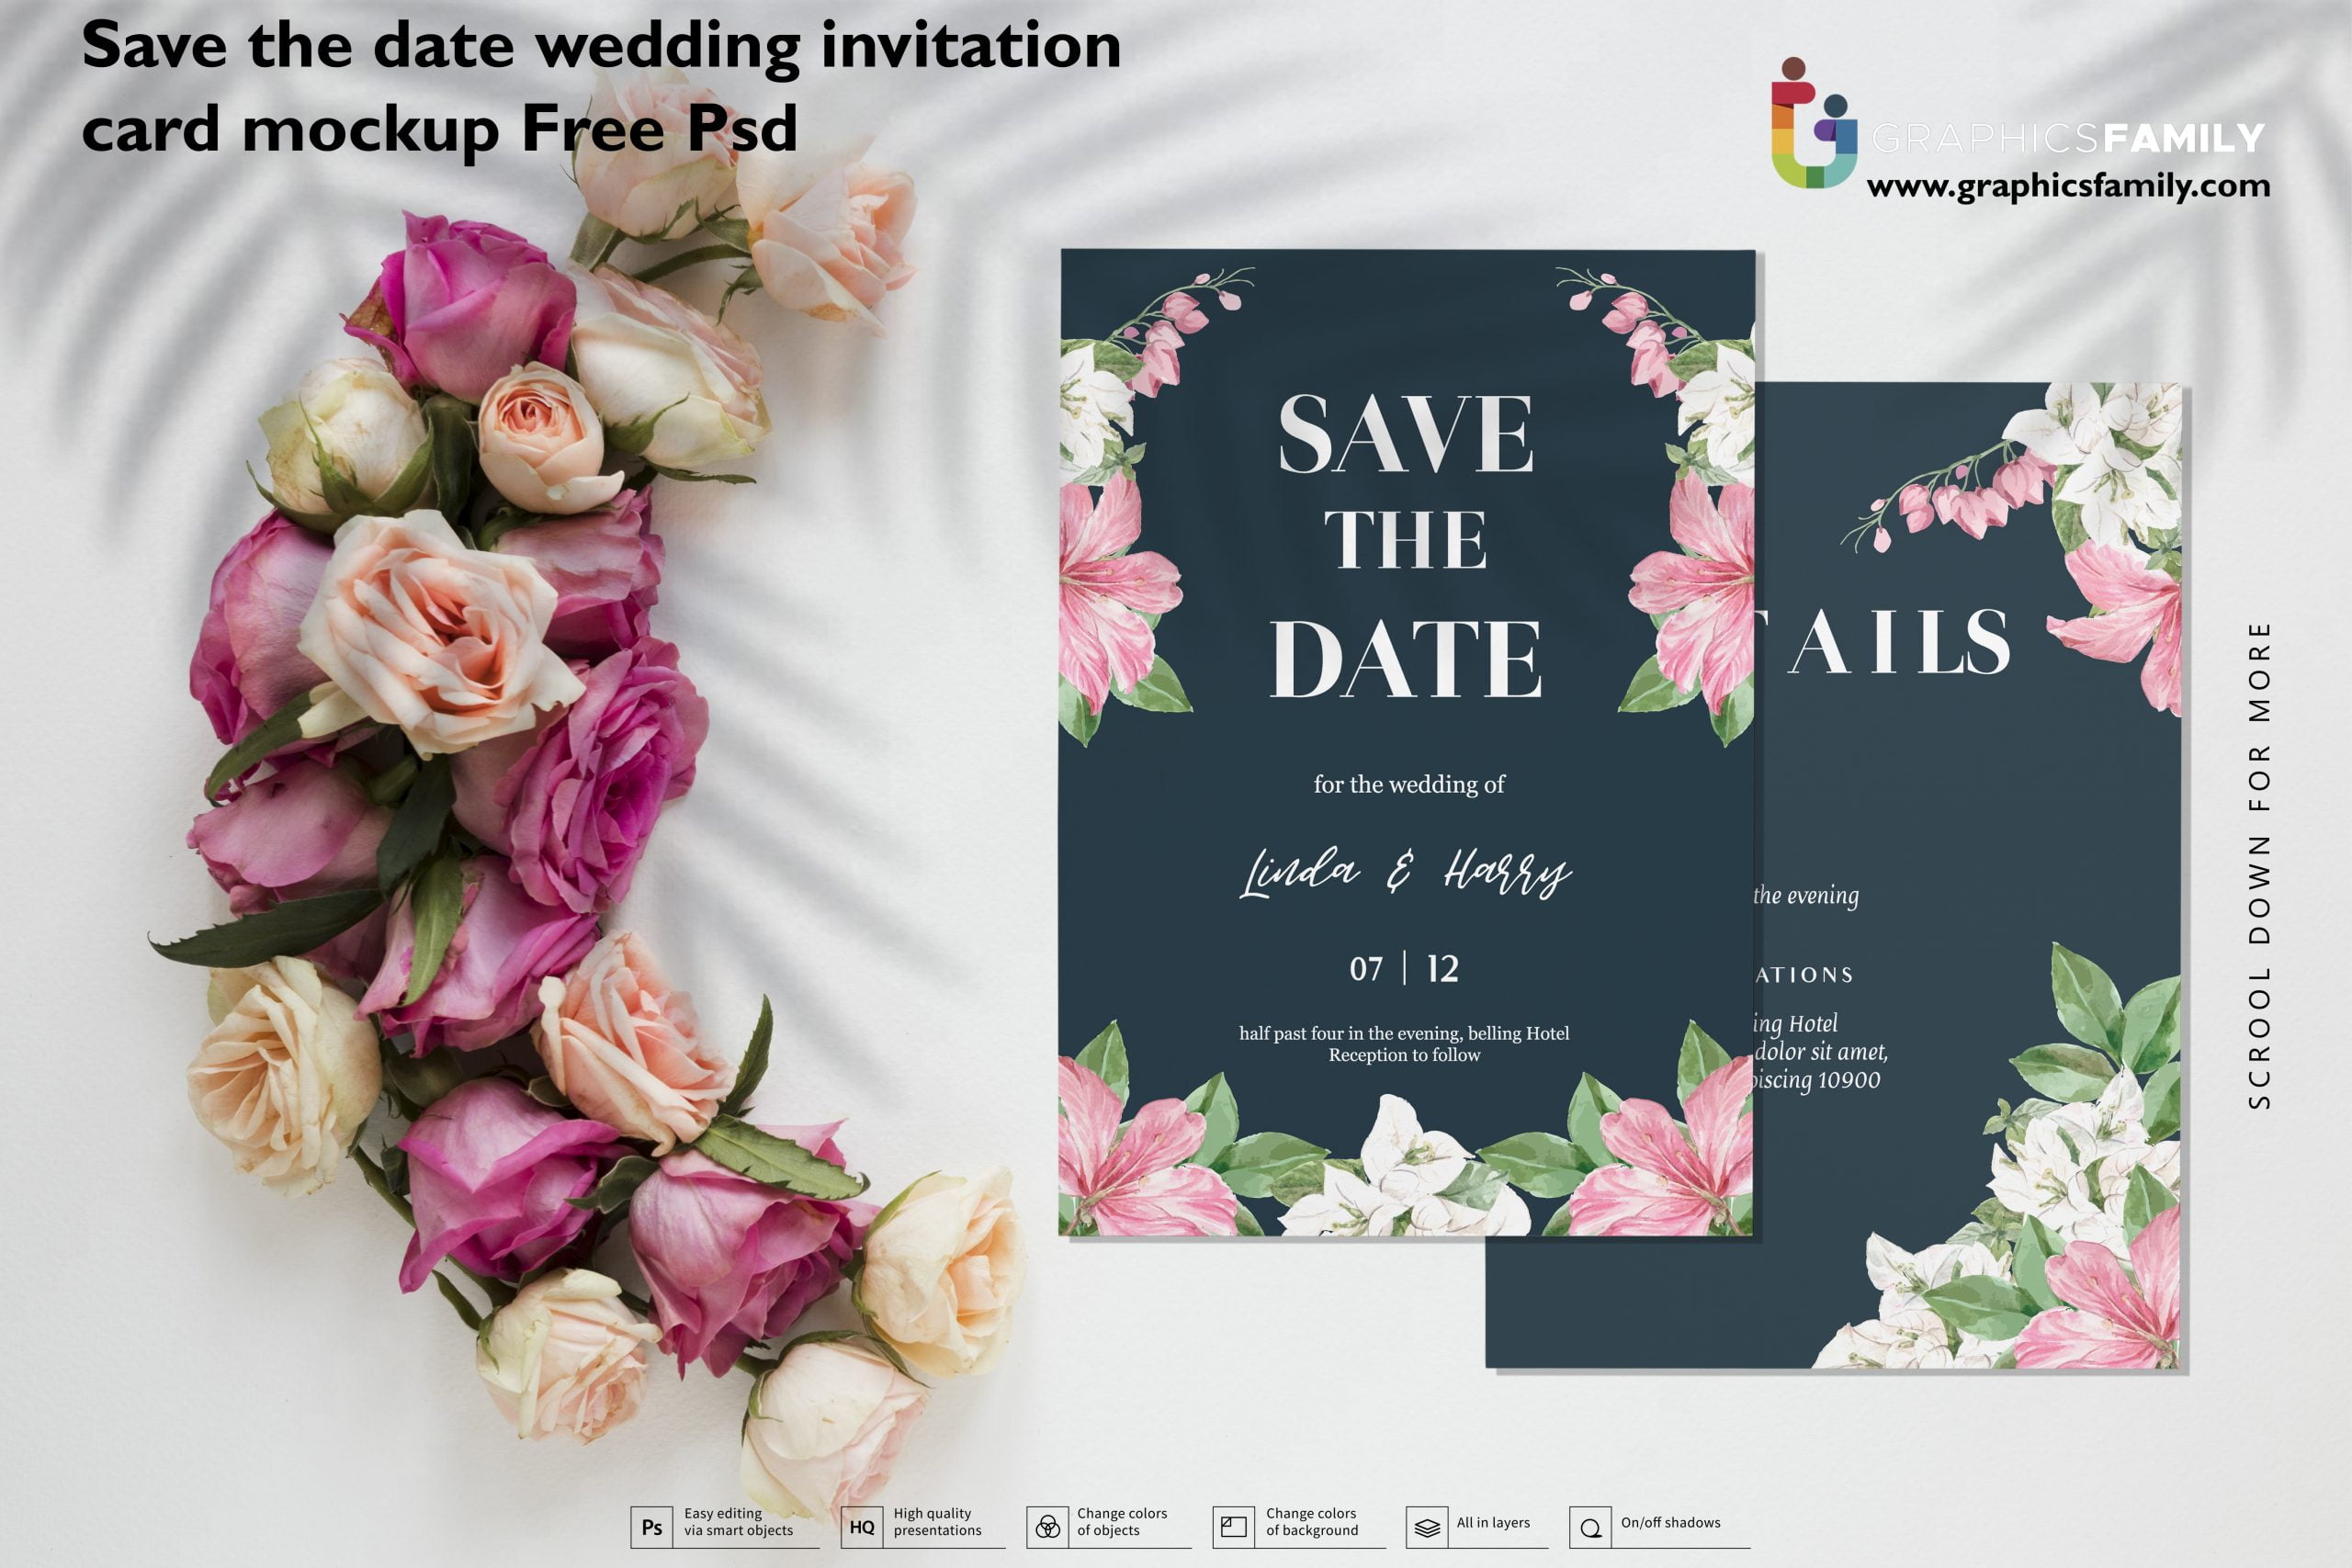 Save the date wedding invitation card mockup Free PSD – GraphicsFamily